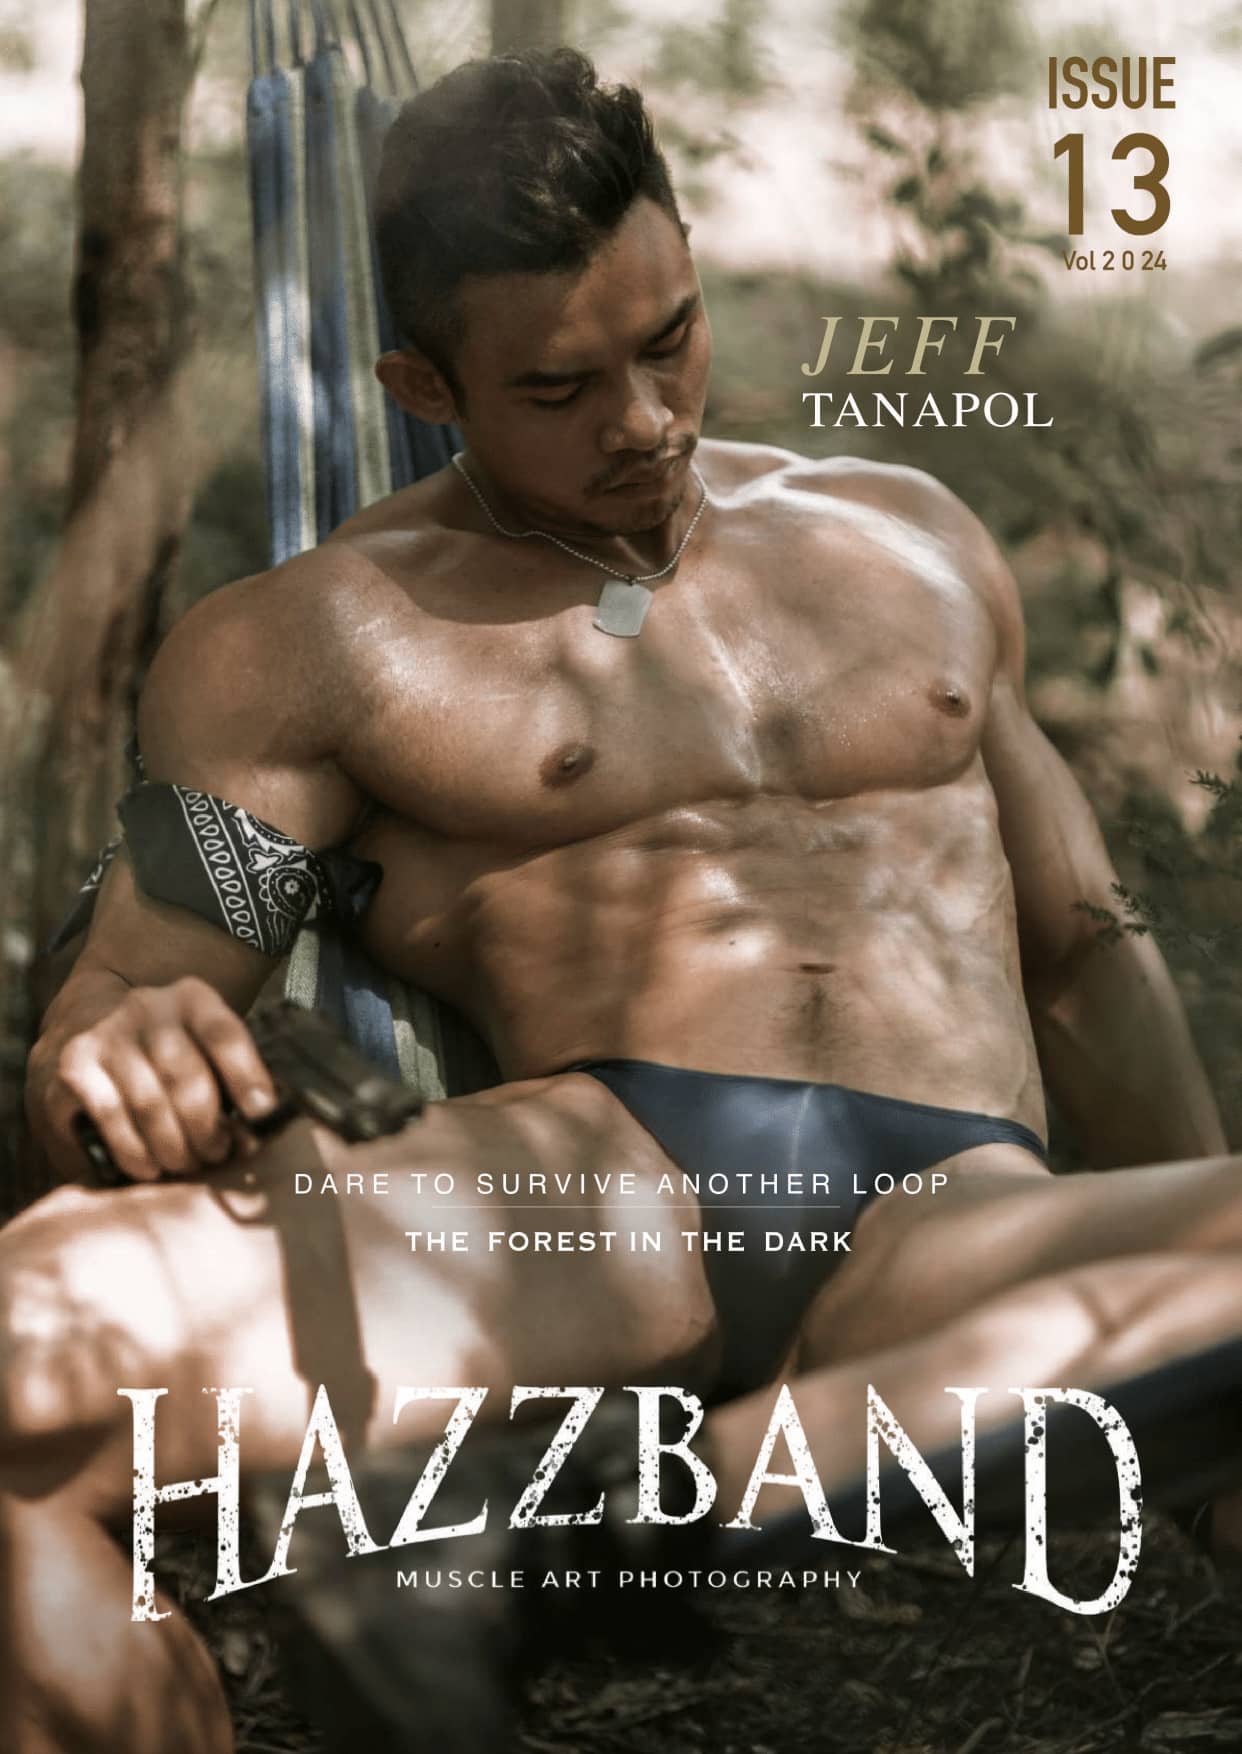 HazzBand 13 -The Forest In The Dark ‖ 18+【PHOTO】